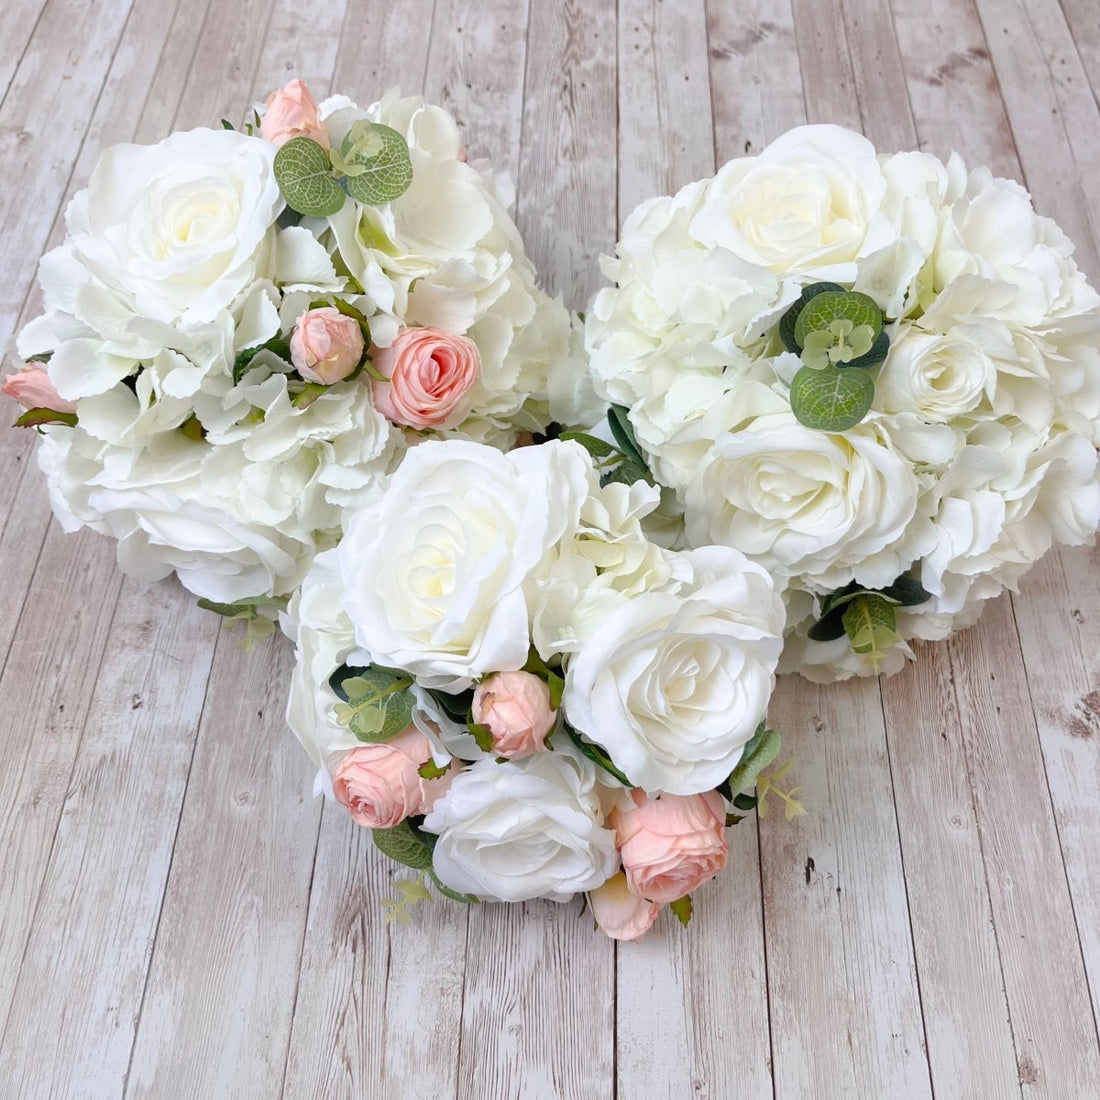 Silk Wedding Bouquets - Artificial Bouquets - Bling Blooms 